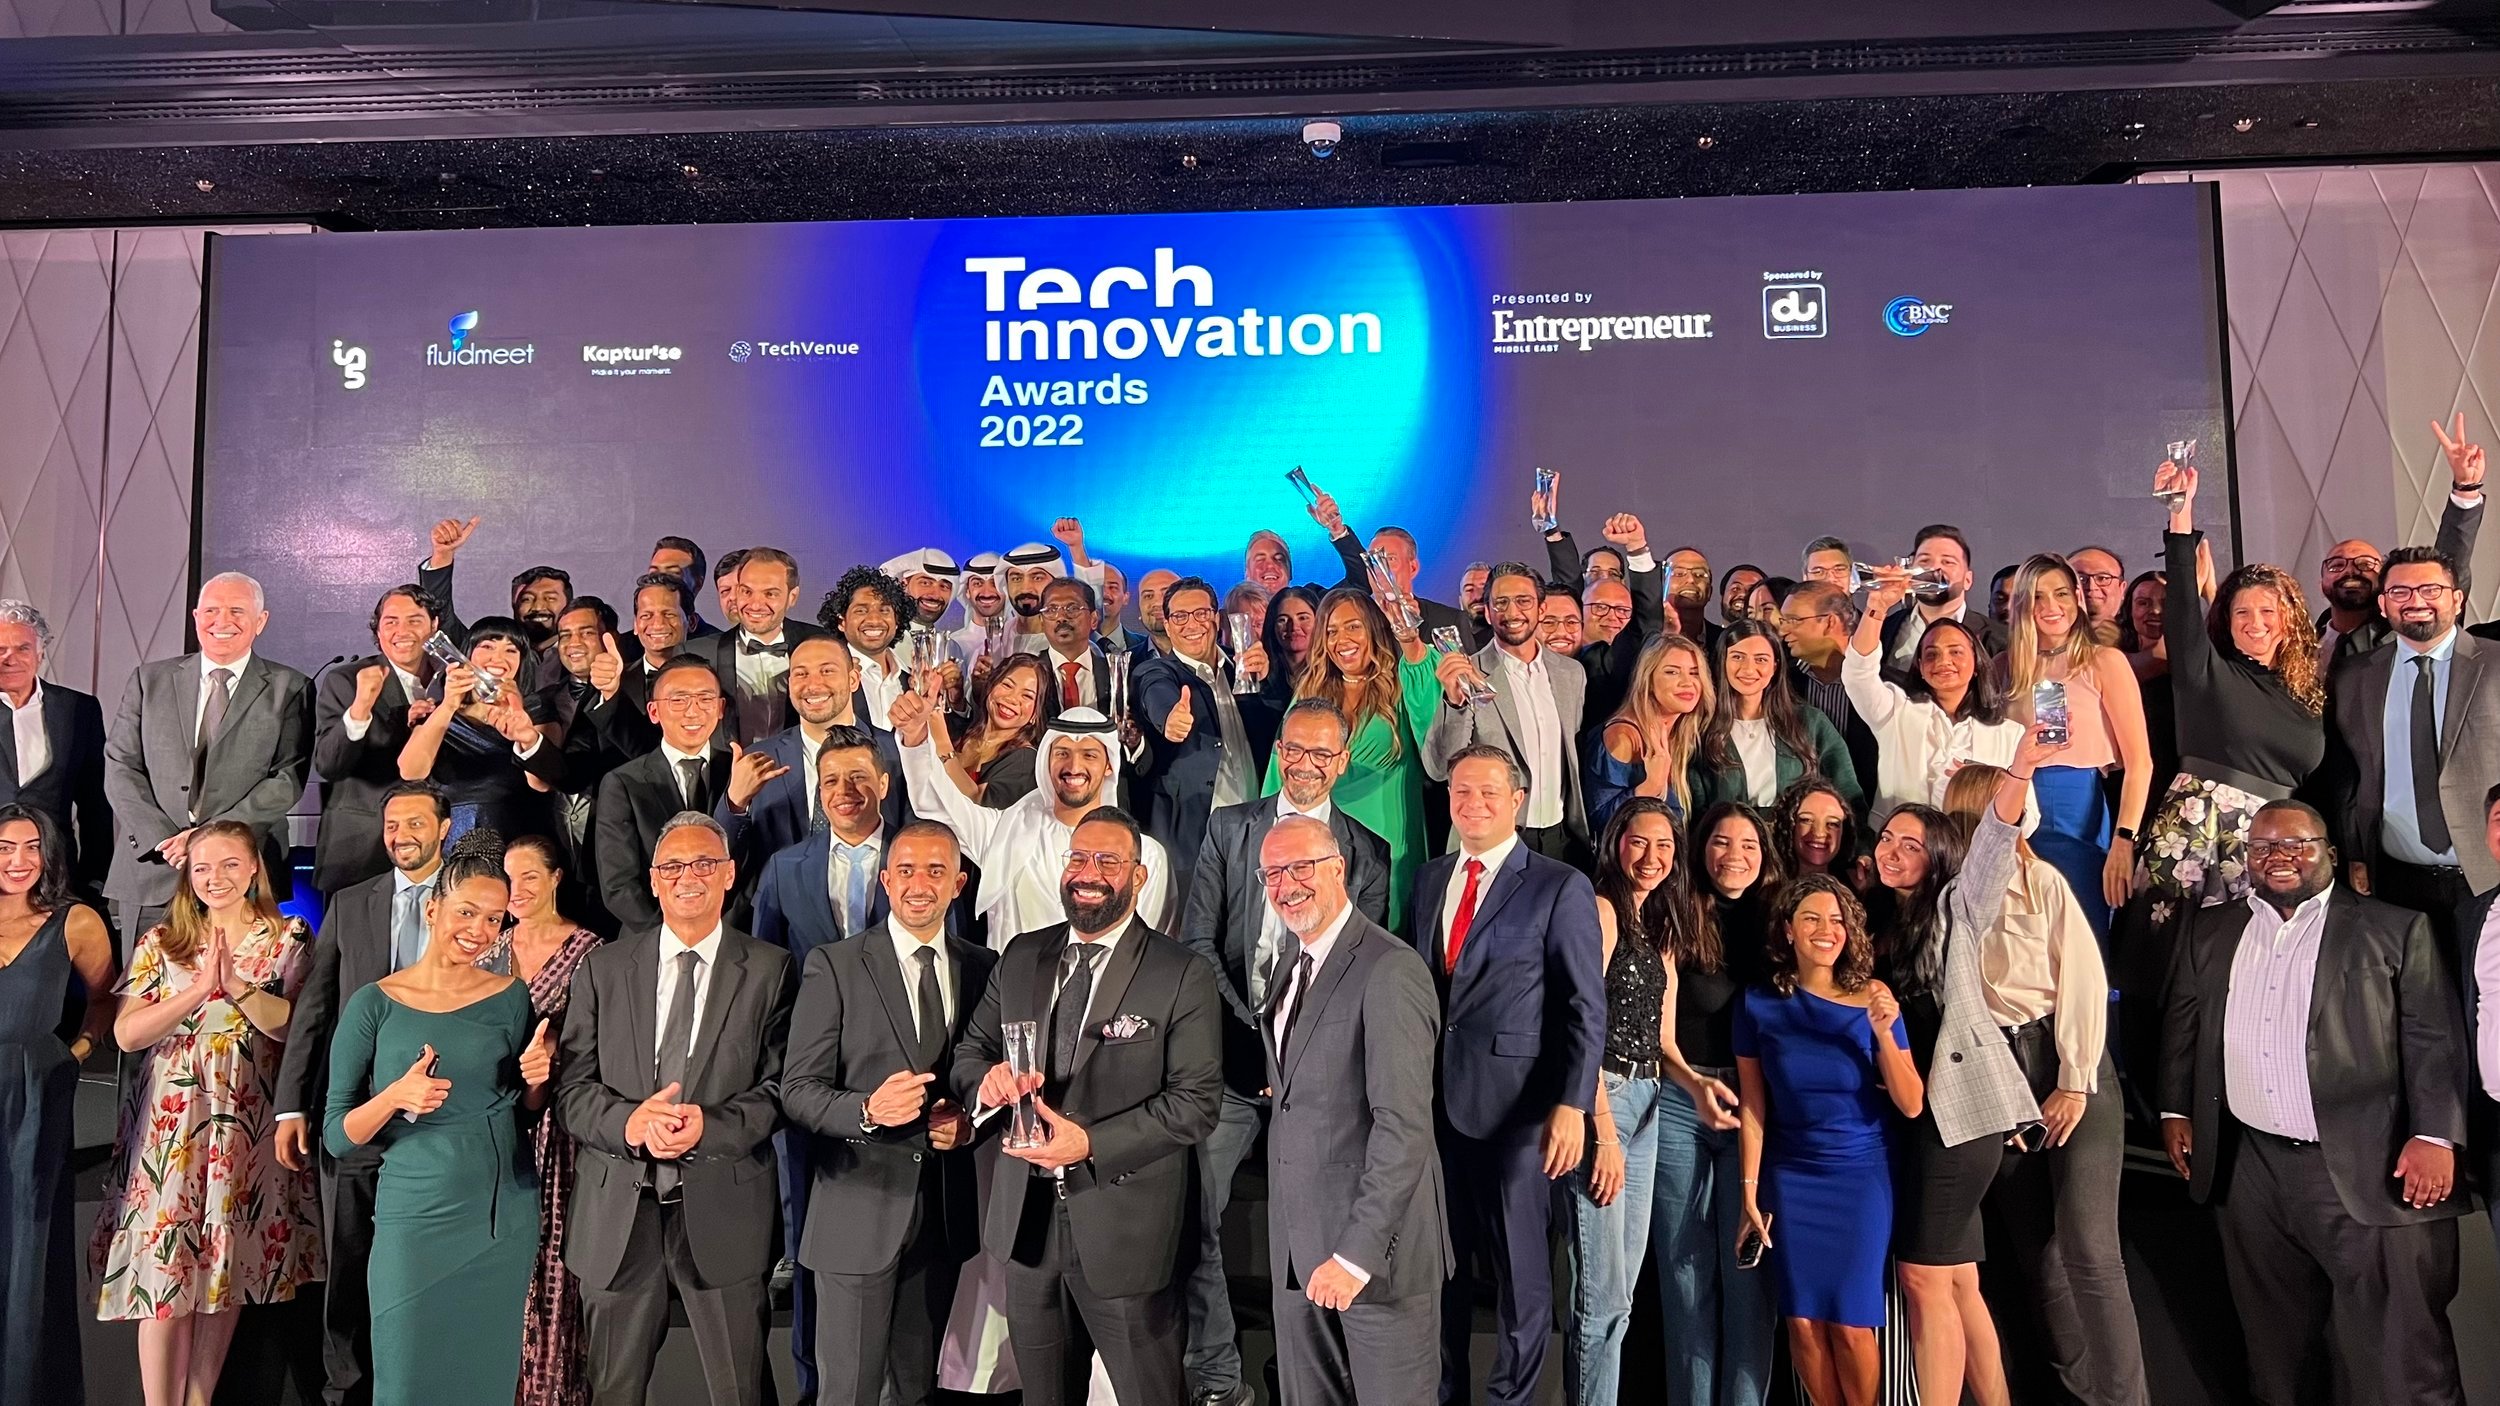 The winners of the Tech Innovation Awards 2022 on stage.